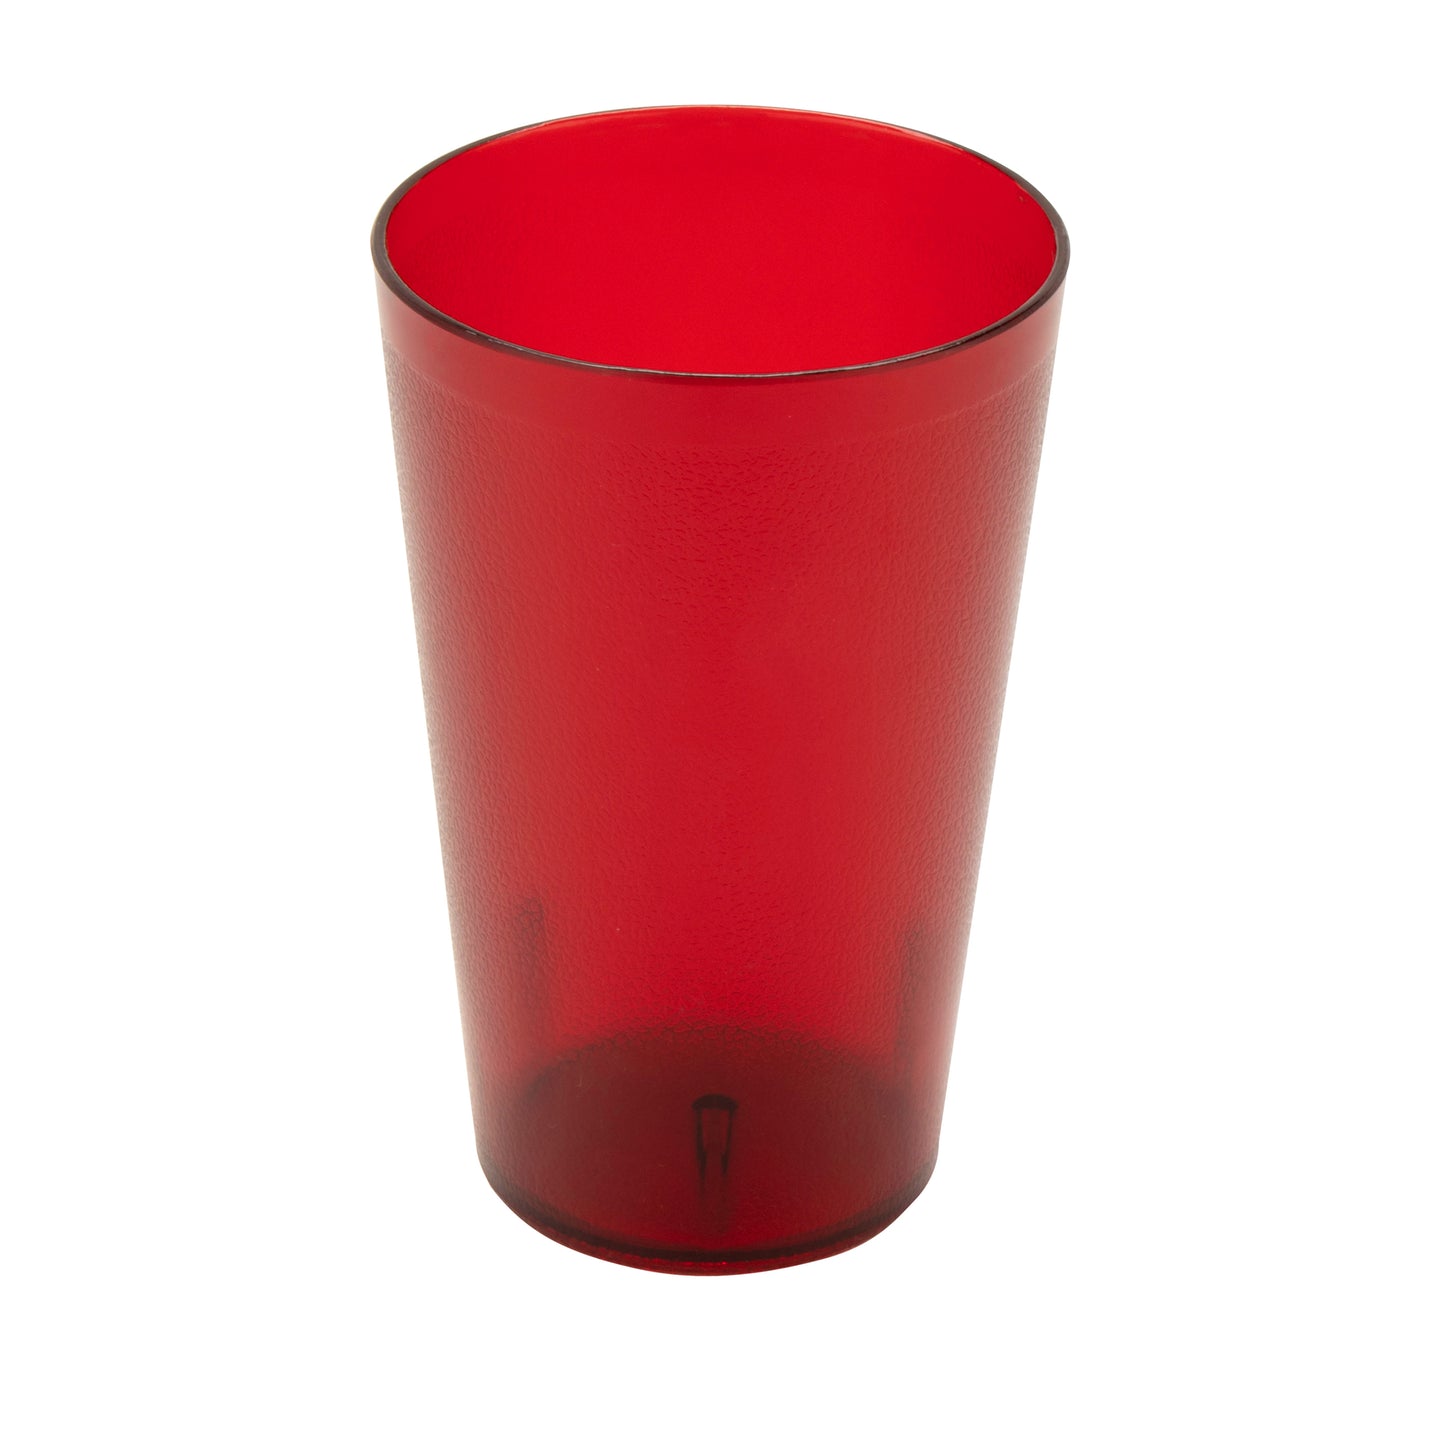 SAN Tumbler 32 Ounce - Red (4 Pack)